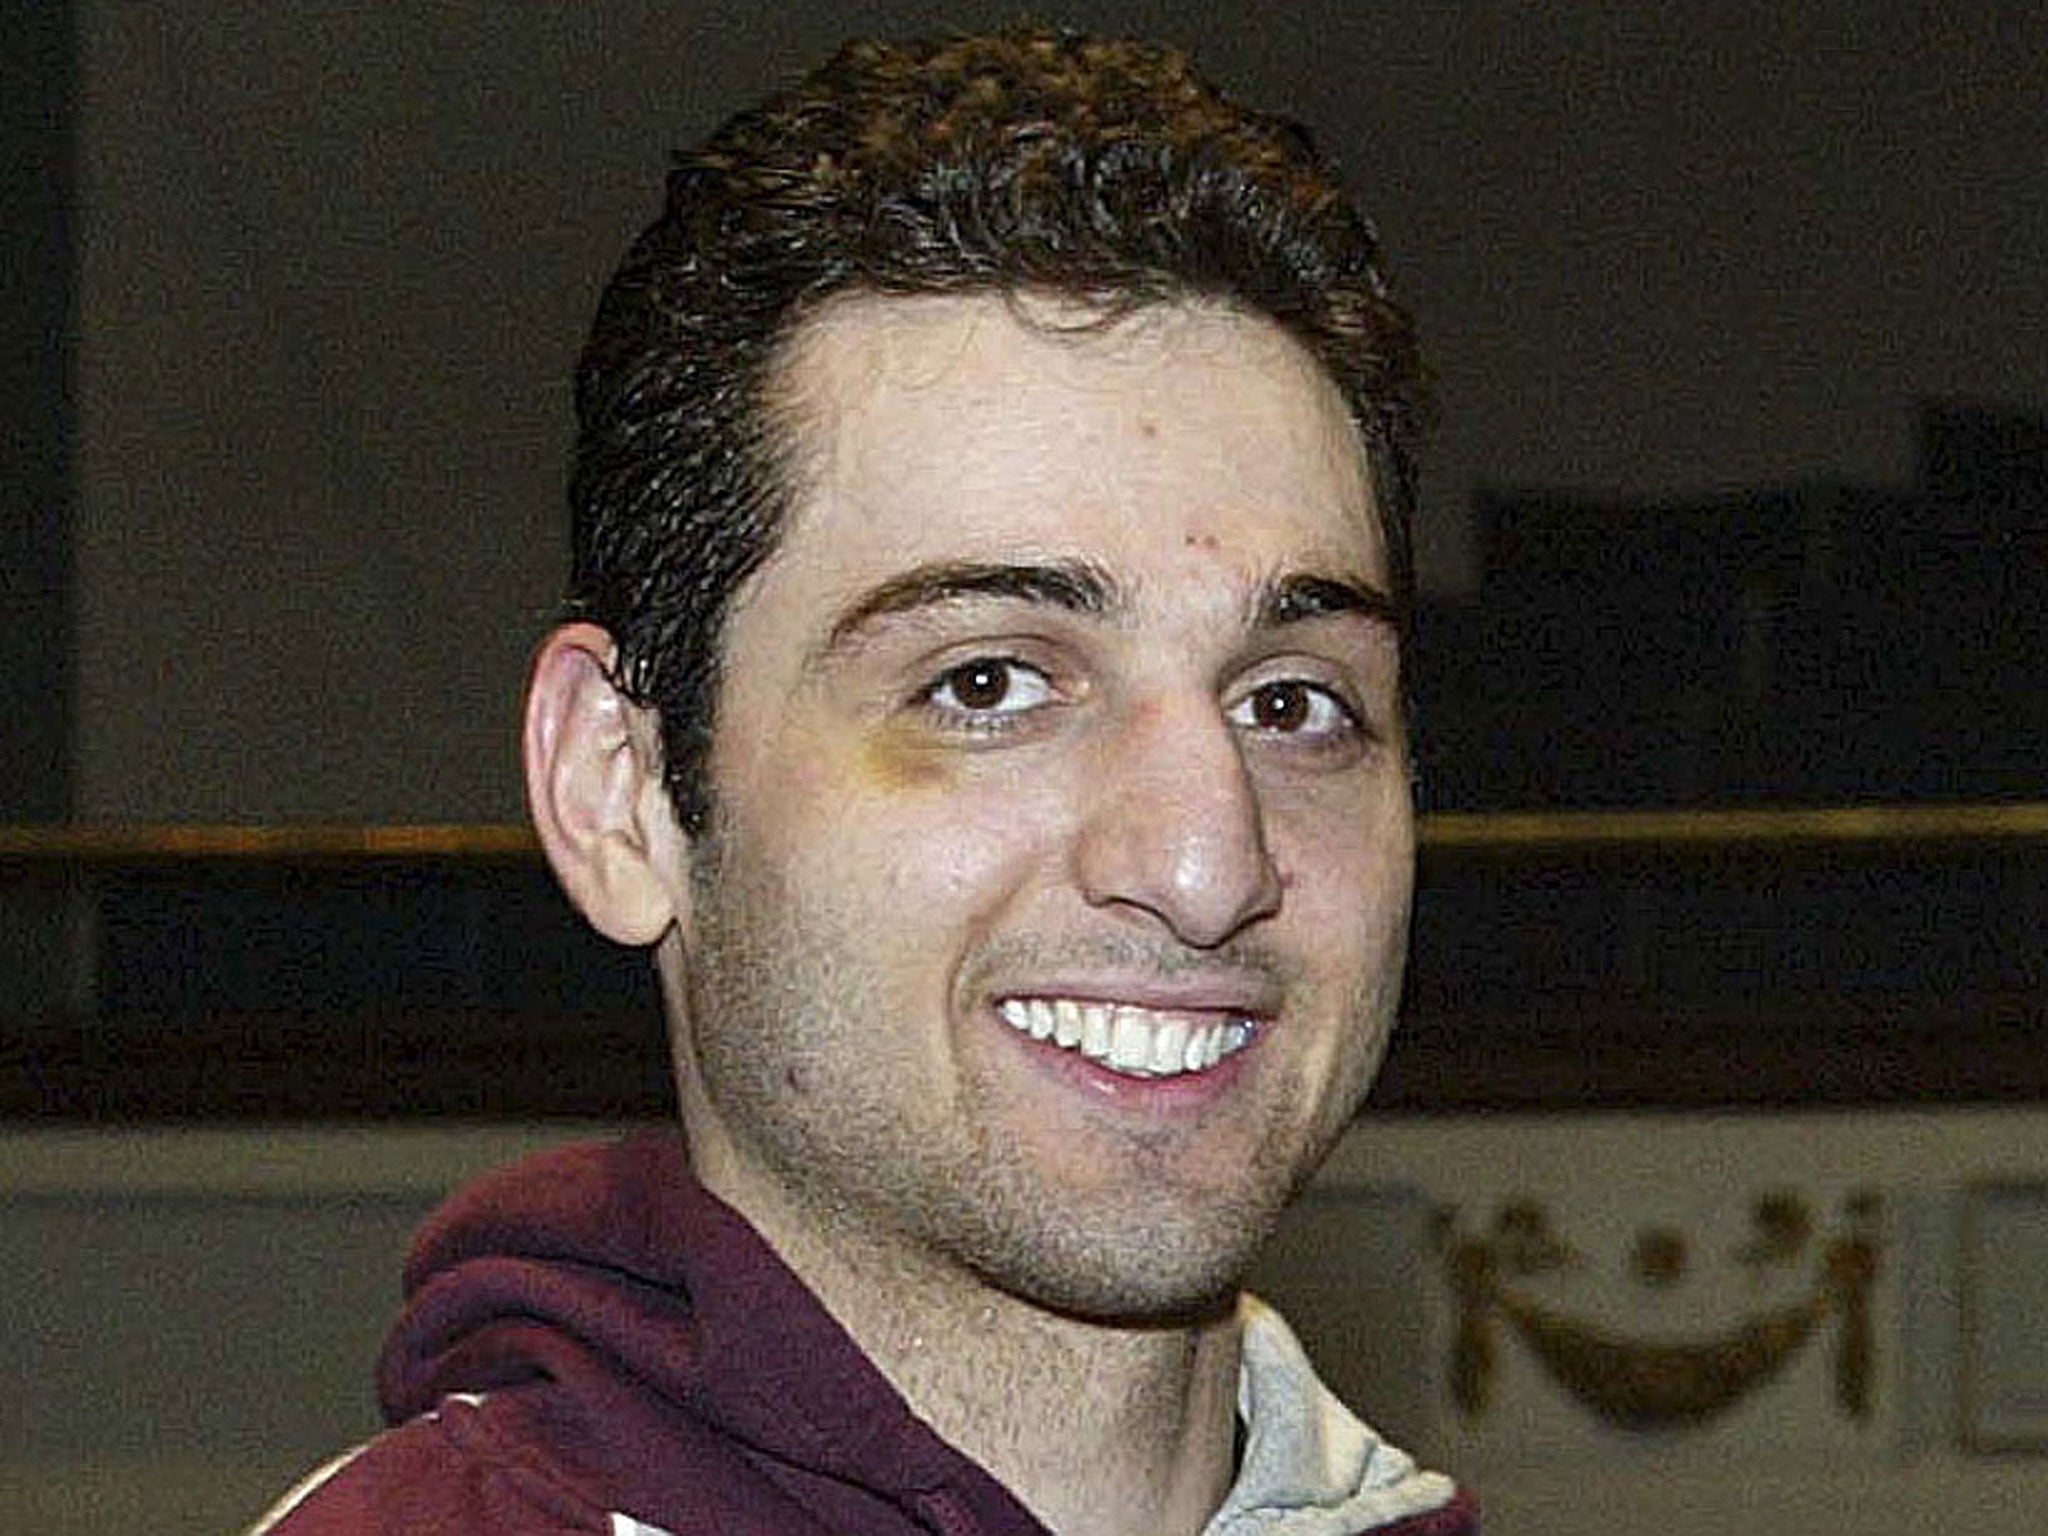 Jeffrey Bauman says he noticed Tamerlan Tsarnaev, pictured, standing alone, not watching the race